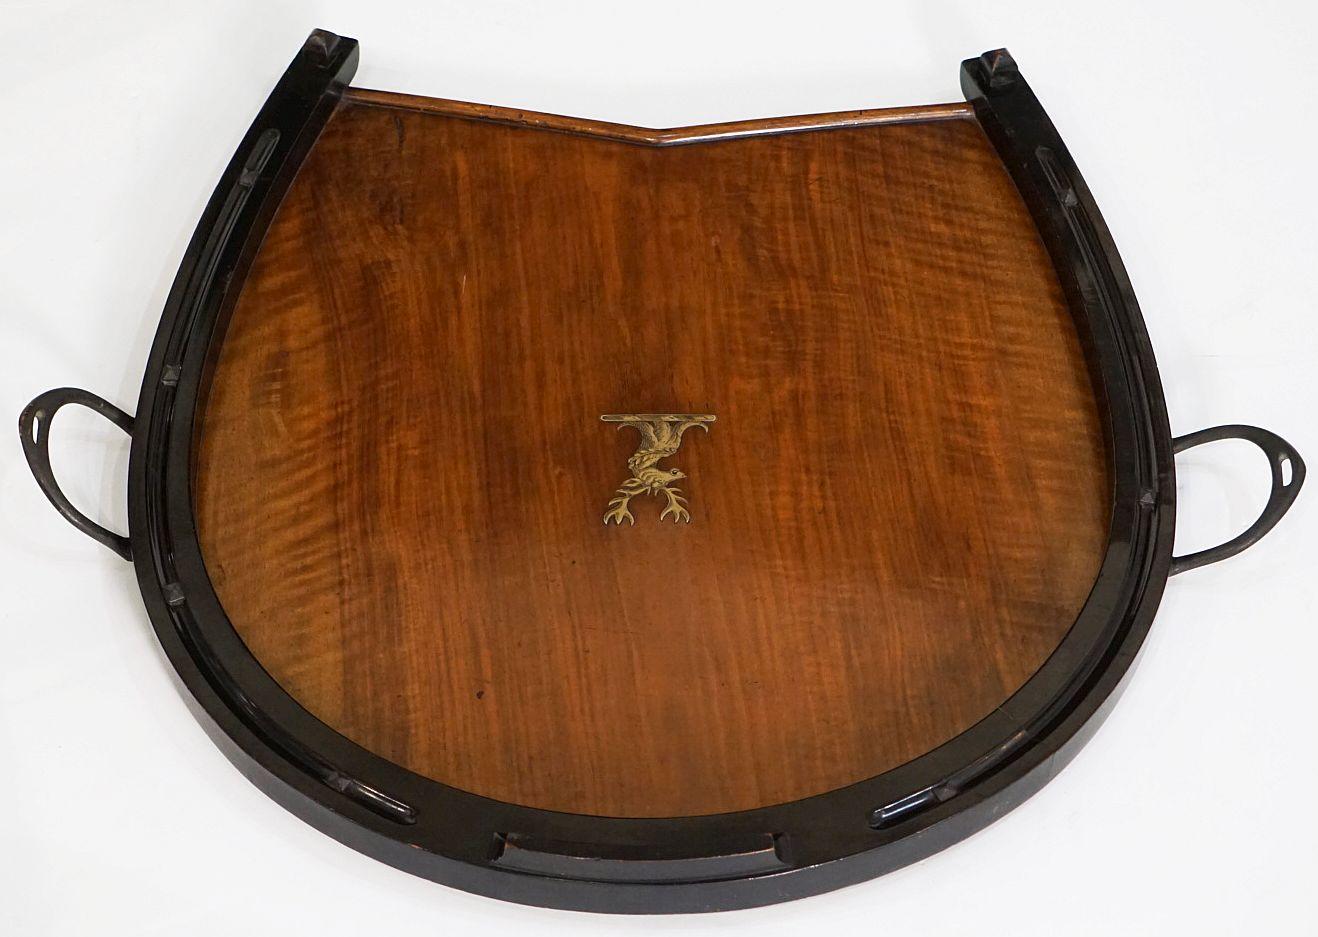 Patinated Horseshoe-Shaped Tray of Walnut with Inlaid Brass Stag from England